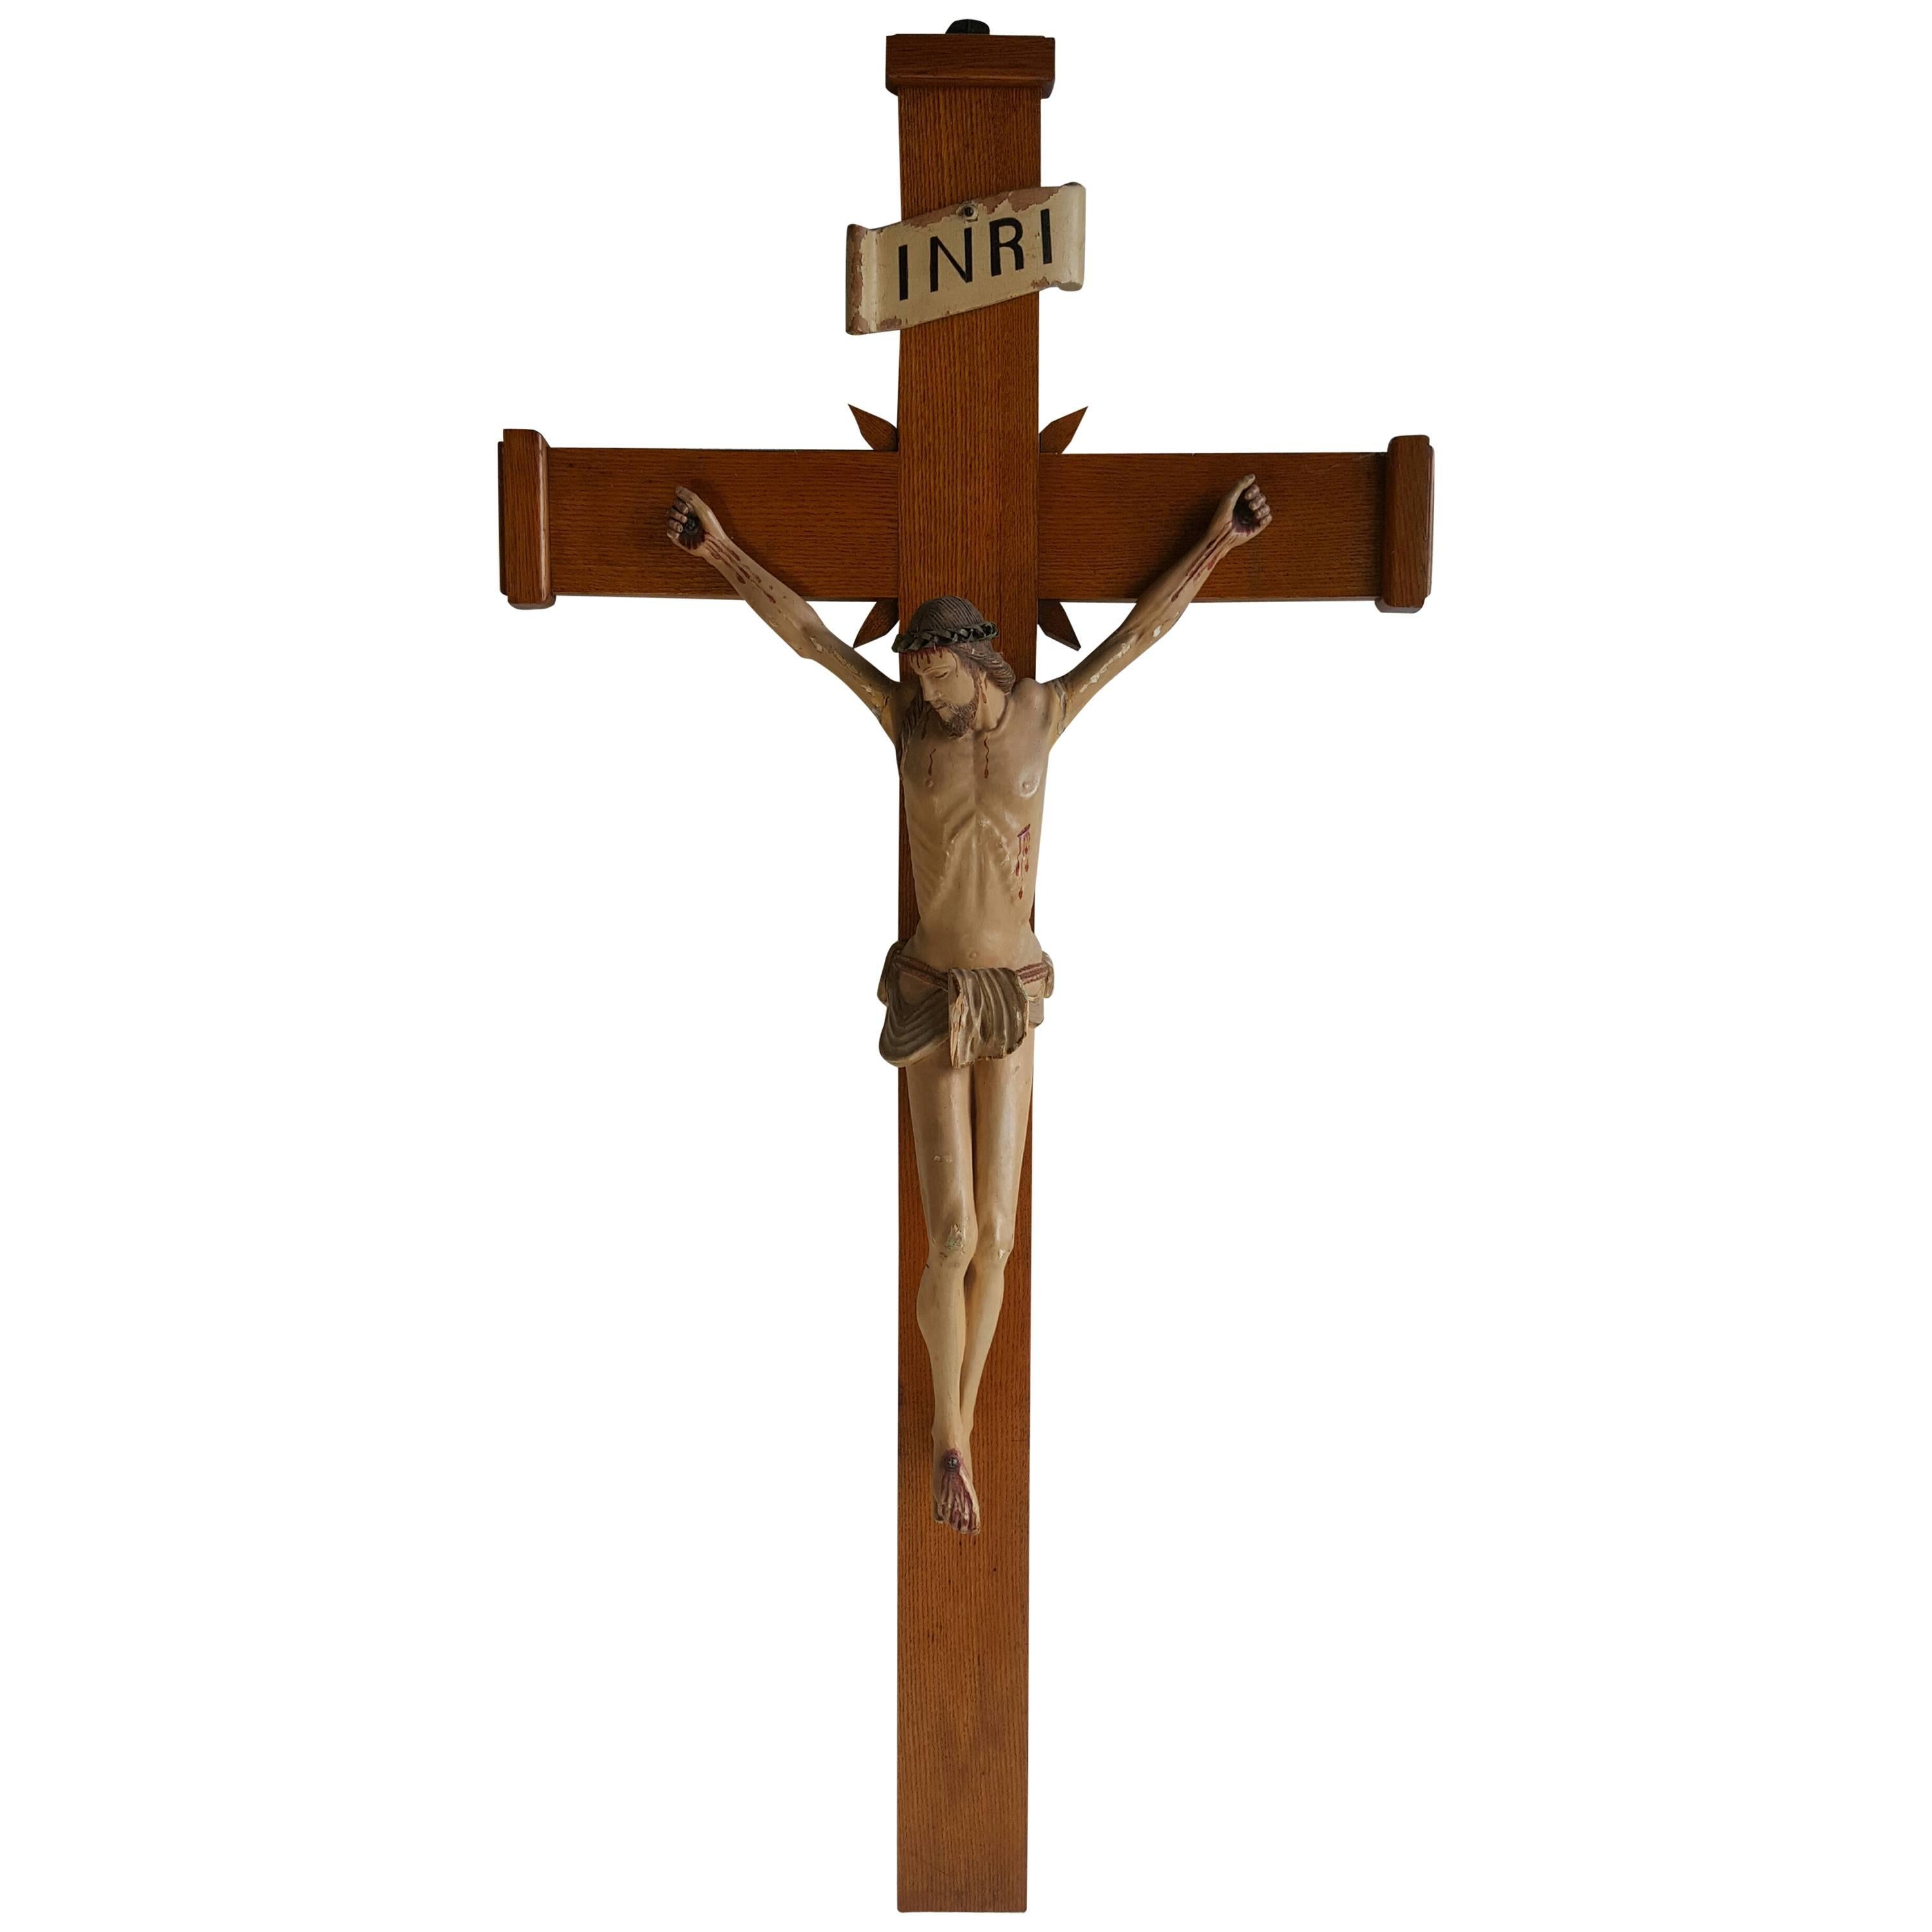 20th Century Antique Carved Wood Crucifix